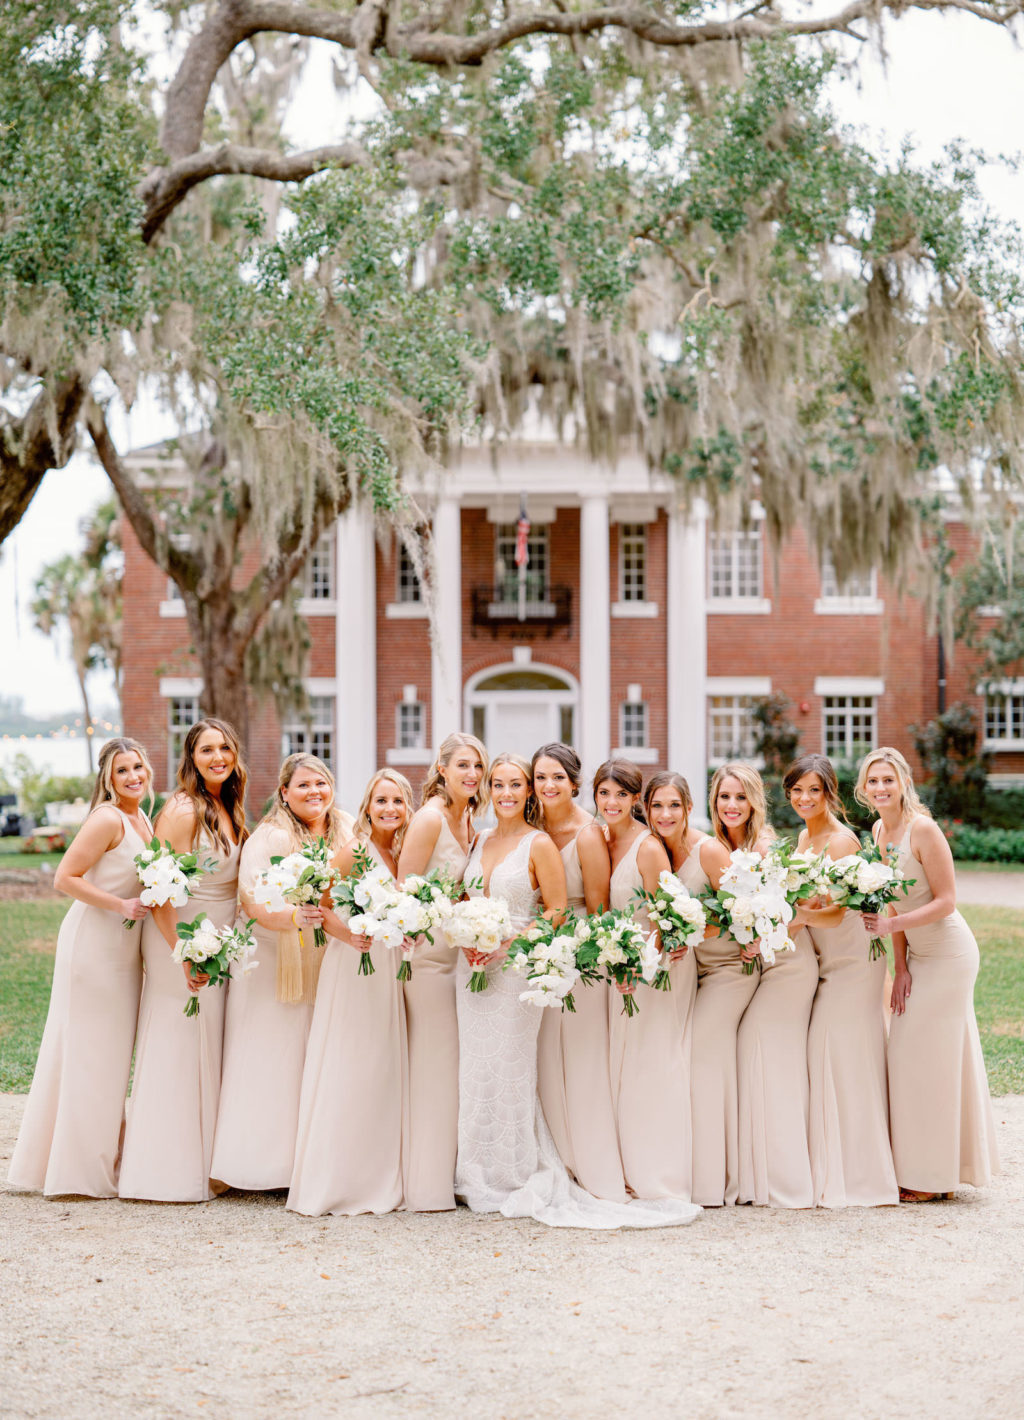 Elegant Bride in Jane Hil Beaded Luella Wedding Dress and Bridesmaids in Champagne Dresses Bridal Part Photo | Waterfront Wedding Venue Bay Preserve at Osprey